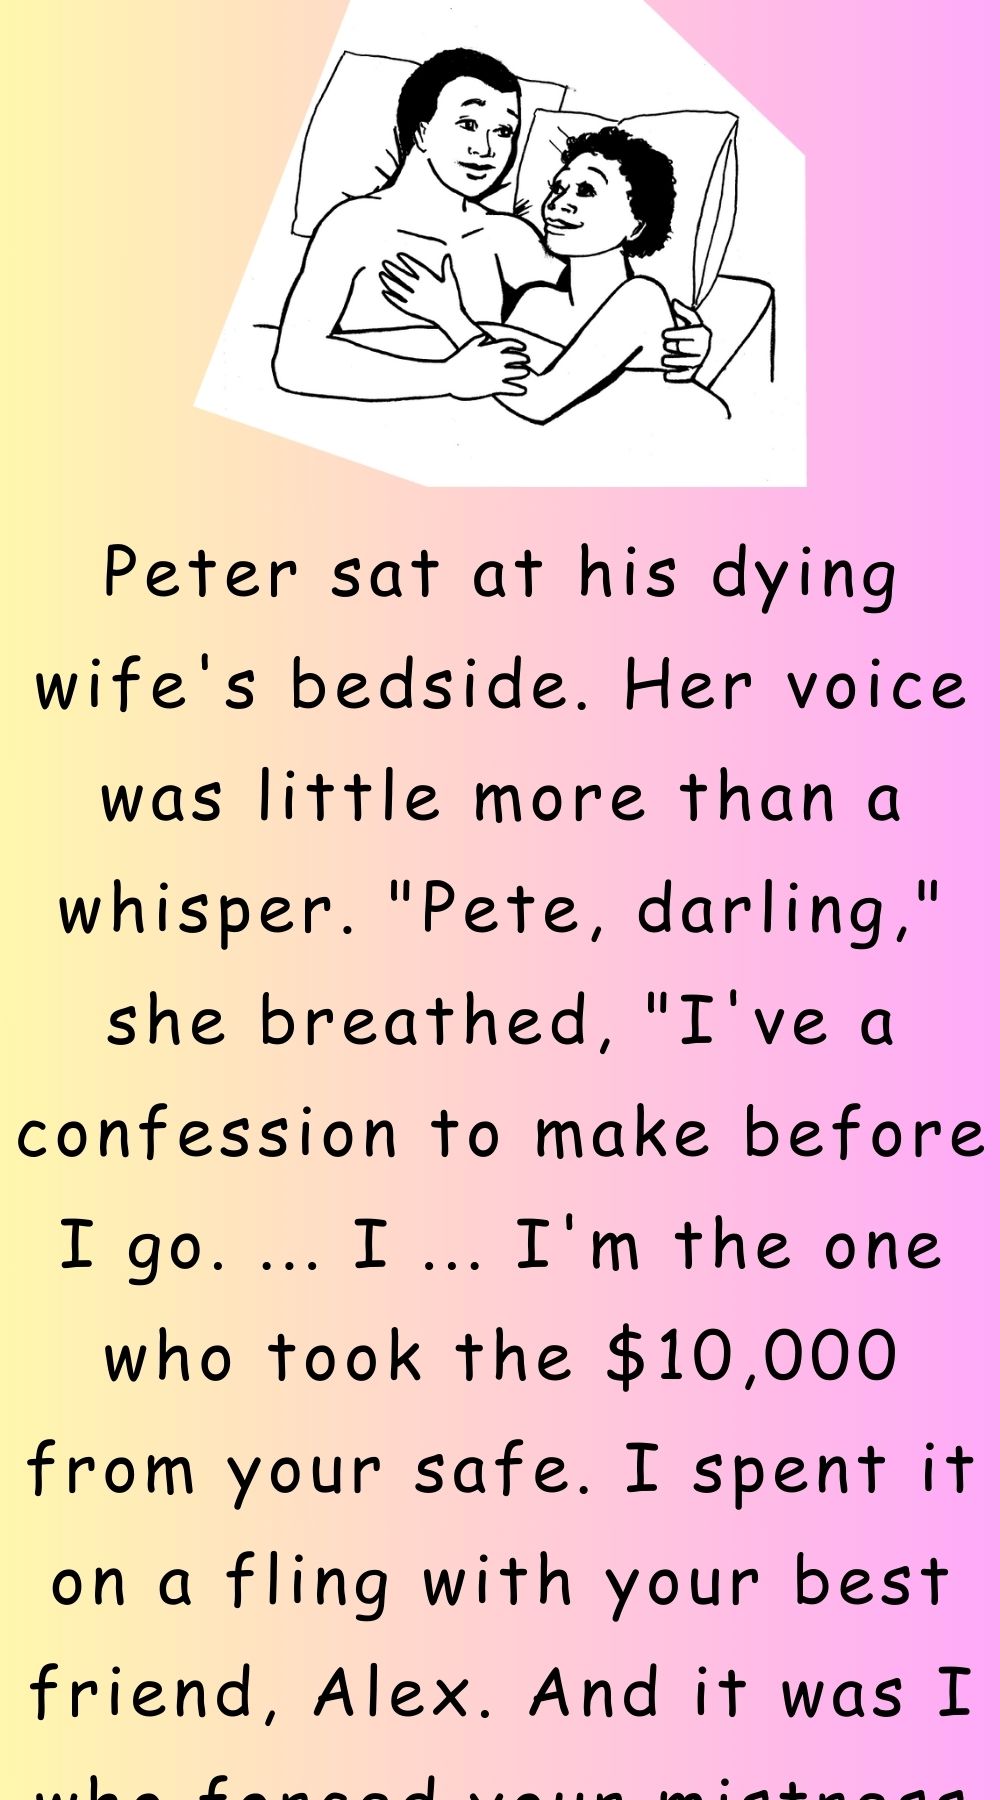 Peter sat at his dying wife